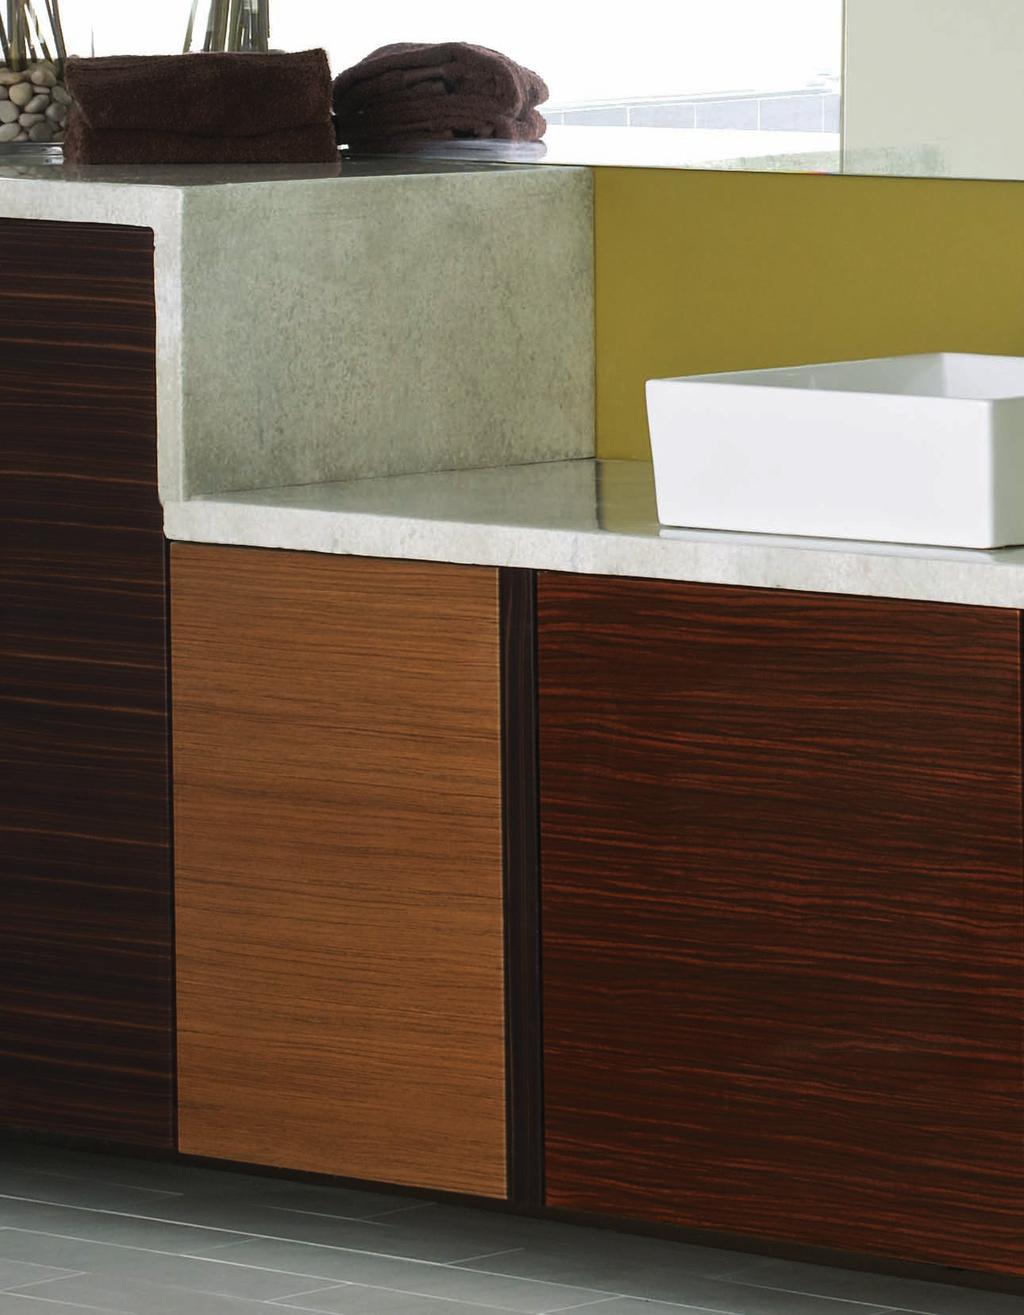 P a m l i Mix things up with Pamli s high gloss wood finishes.